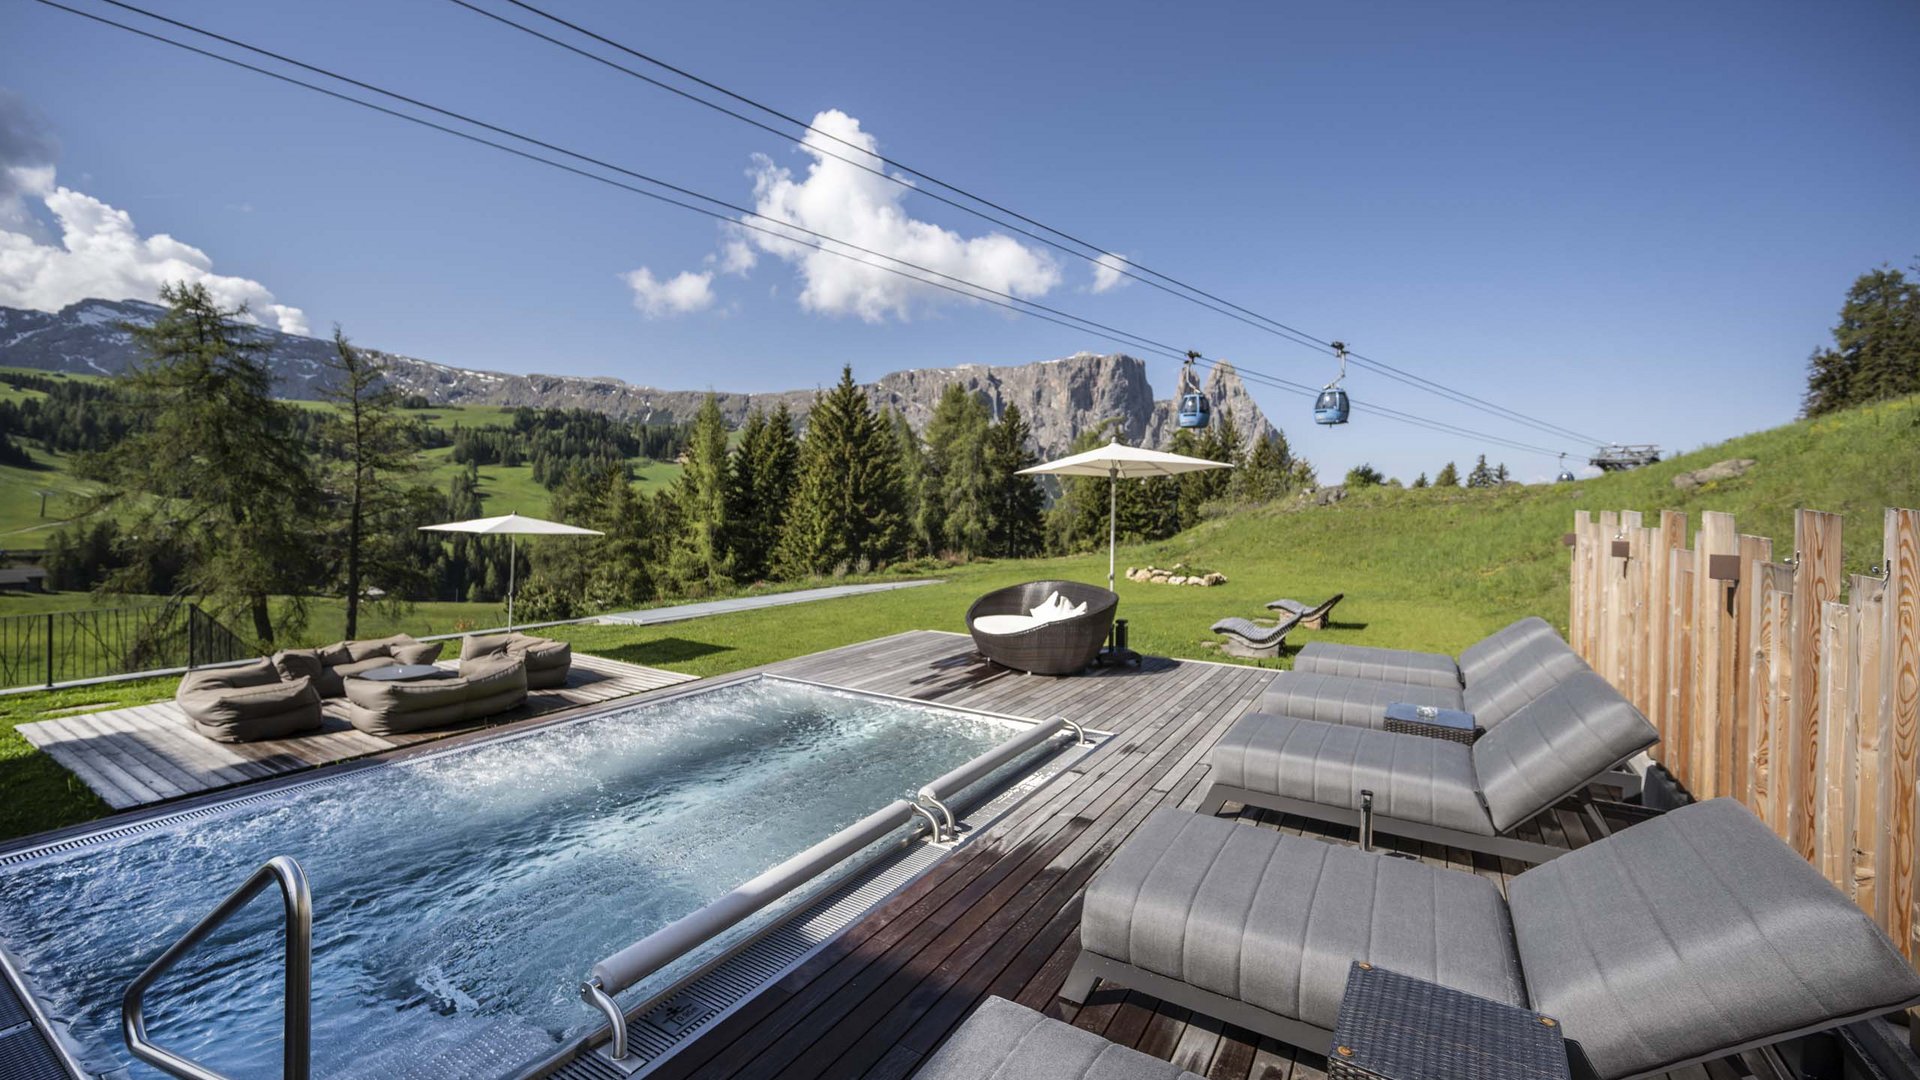 Our inclusive services for your holiday in South Tyrol